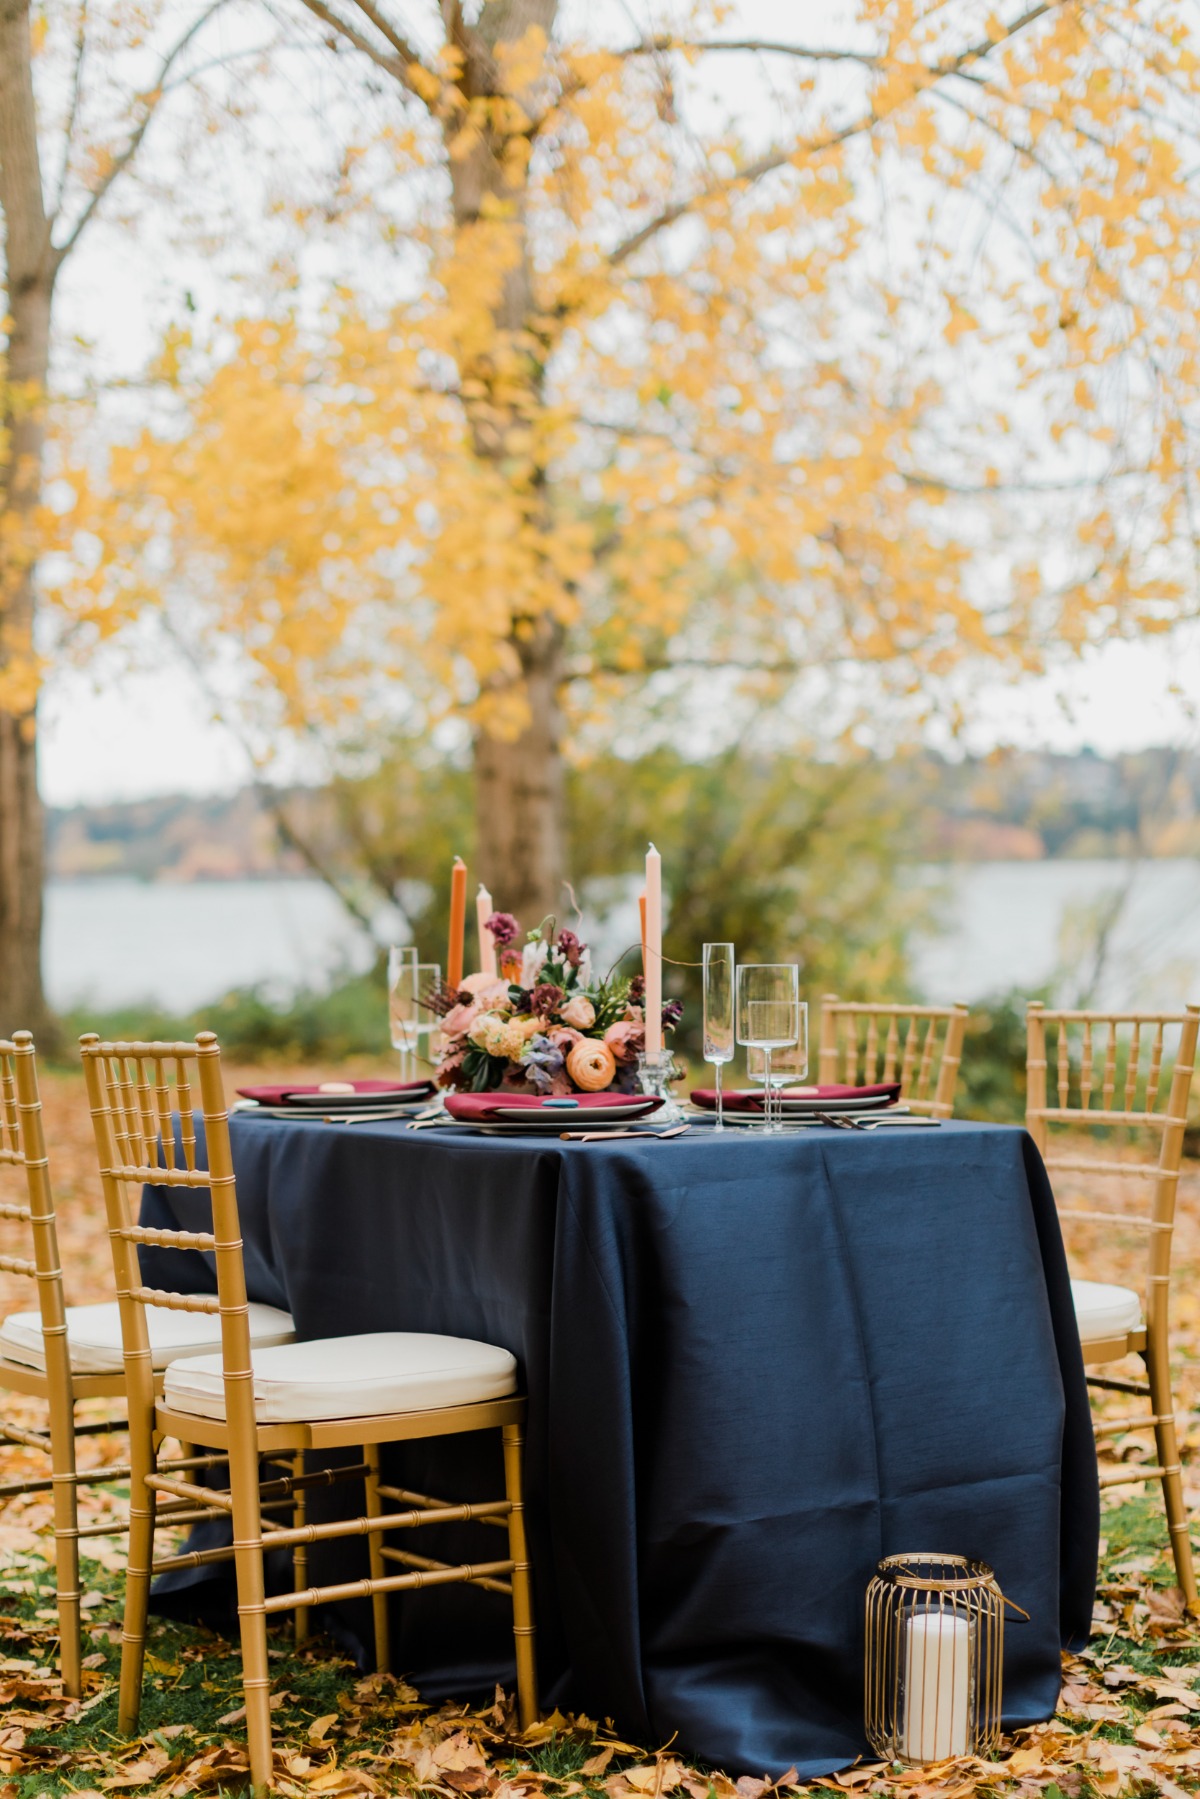 Warm and Intimate Elopement with Fall Foliage in Seattle